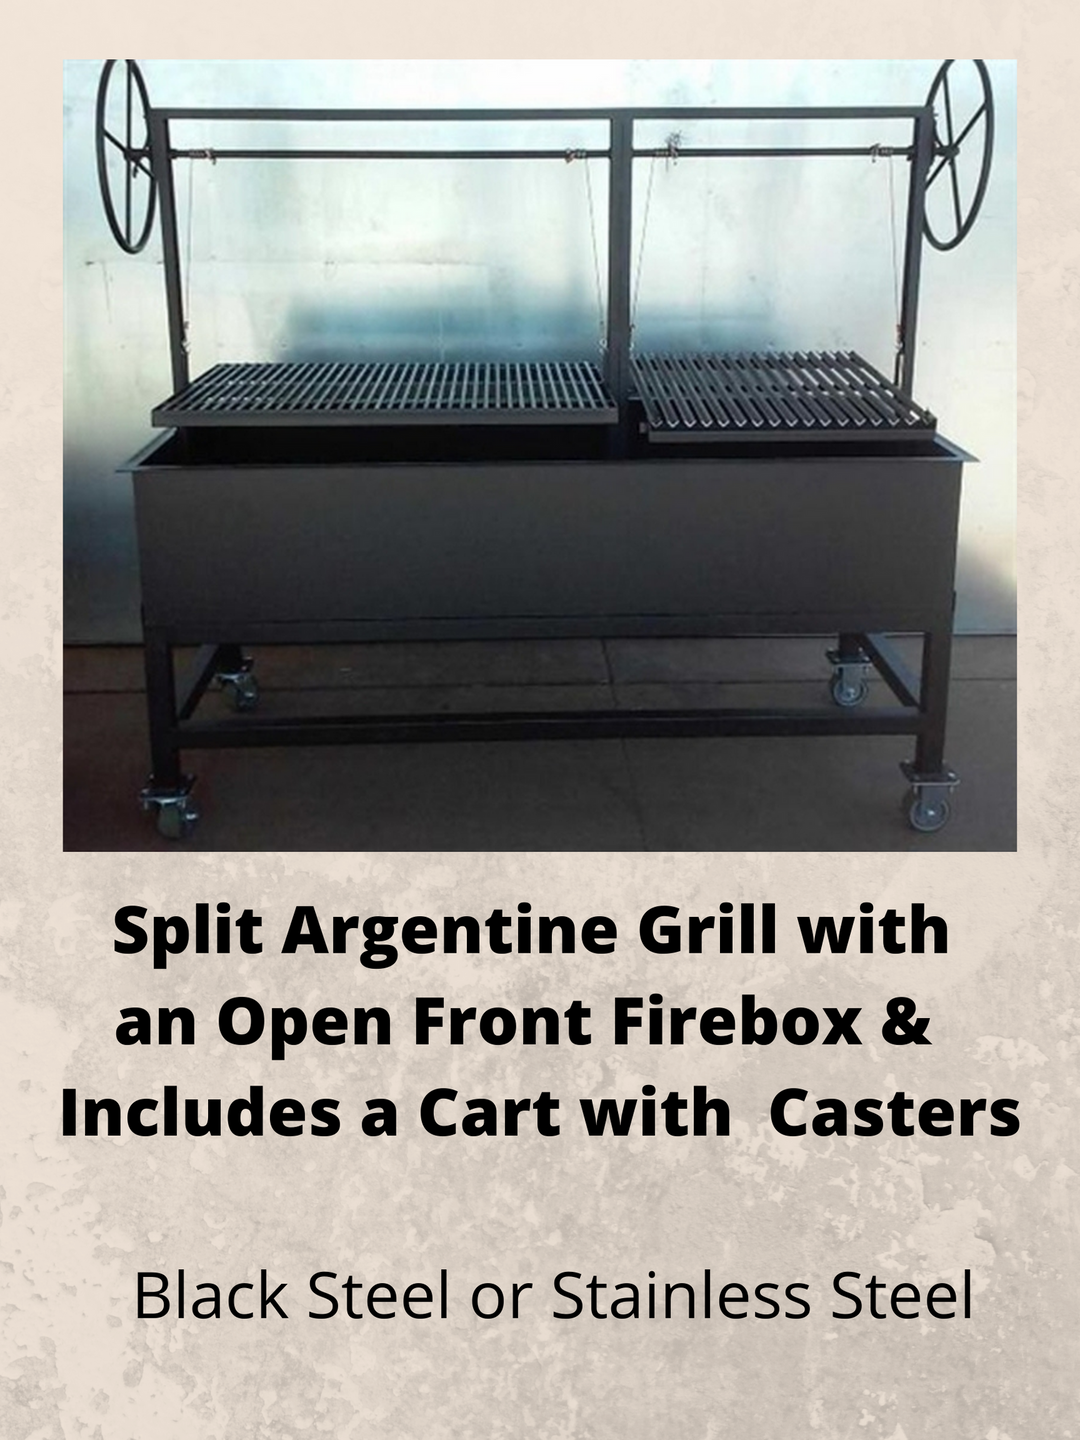 4426 - Commercial Split Argentine Grill with Casters